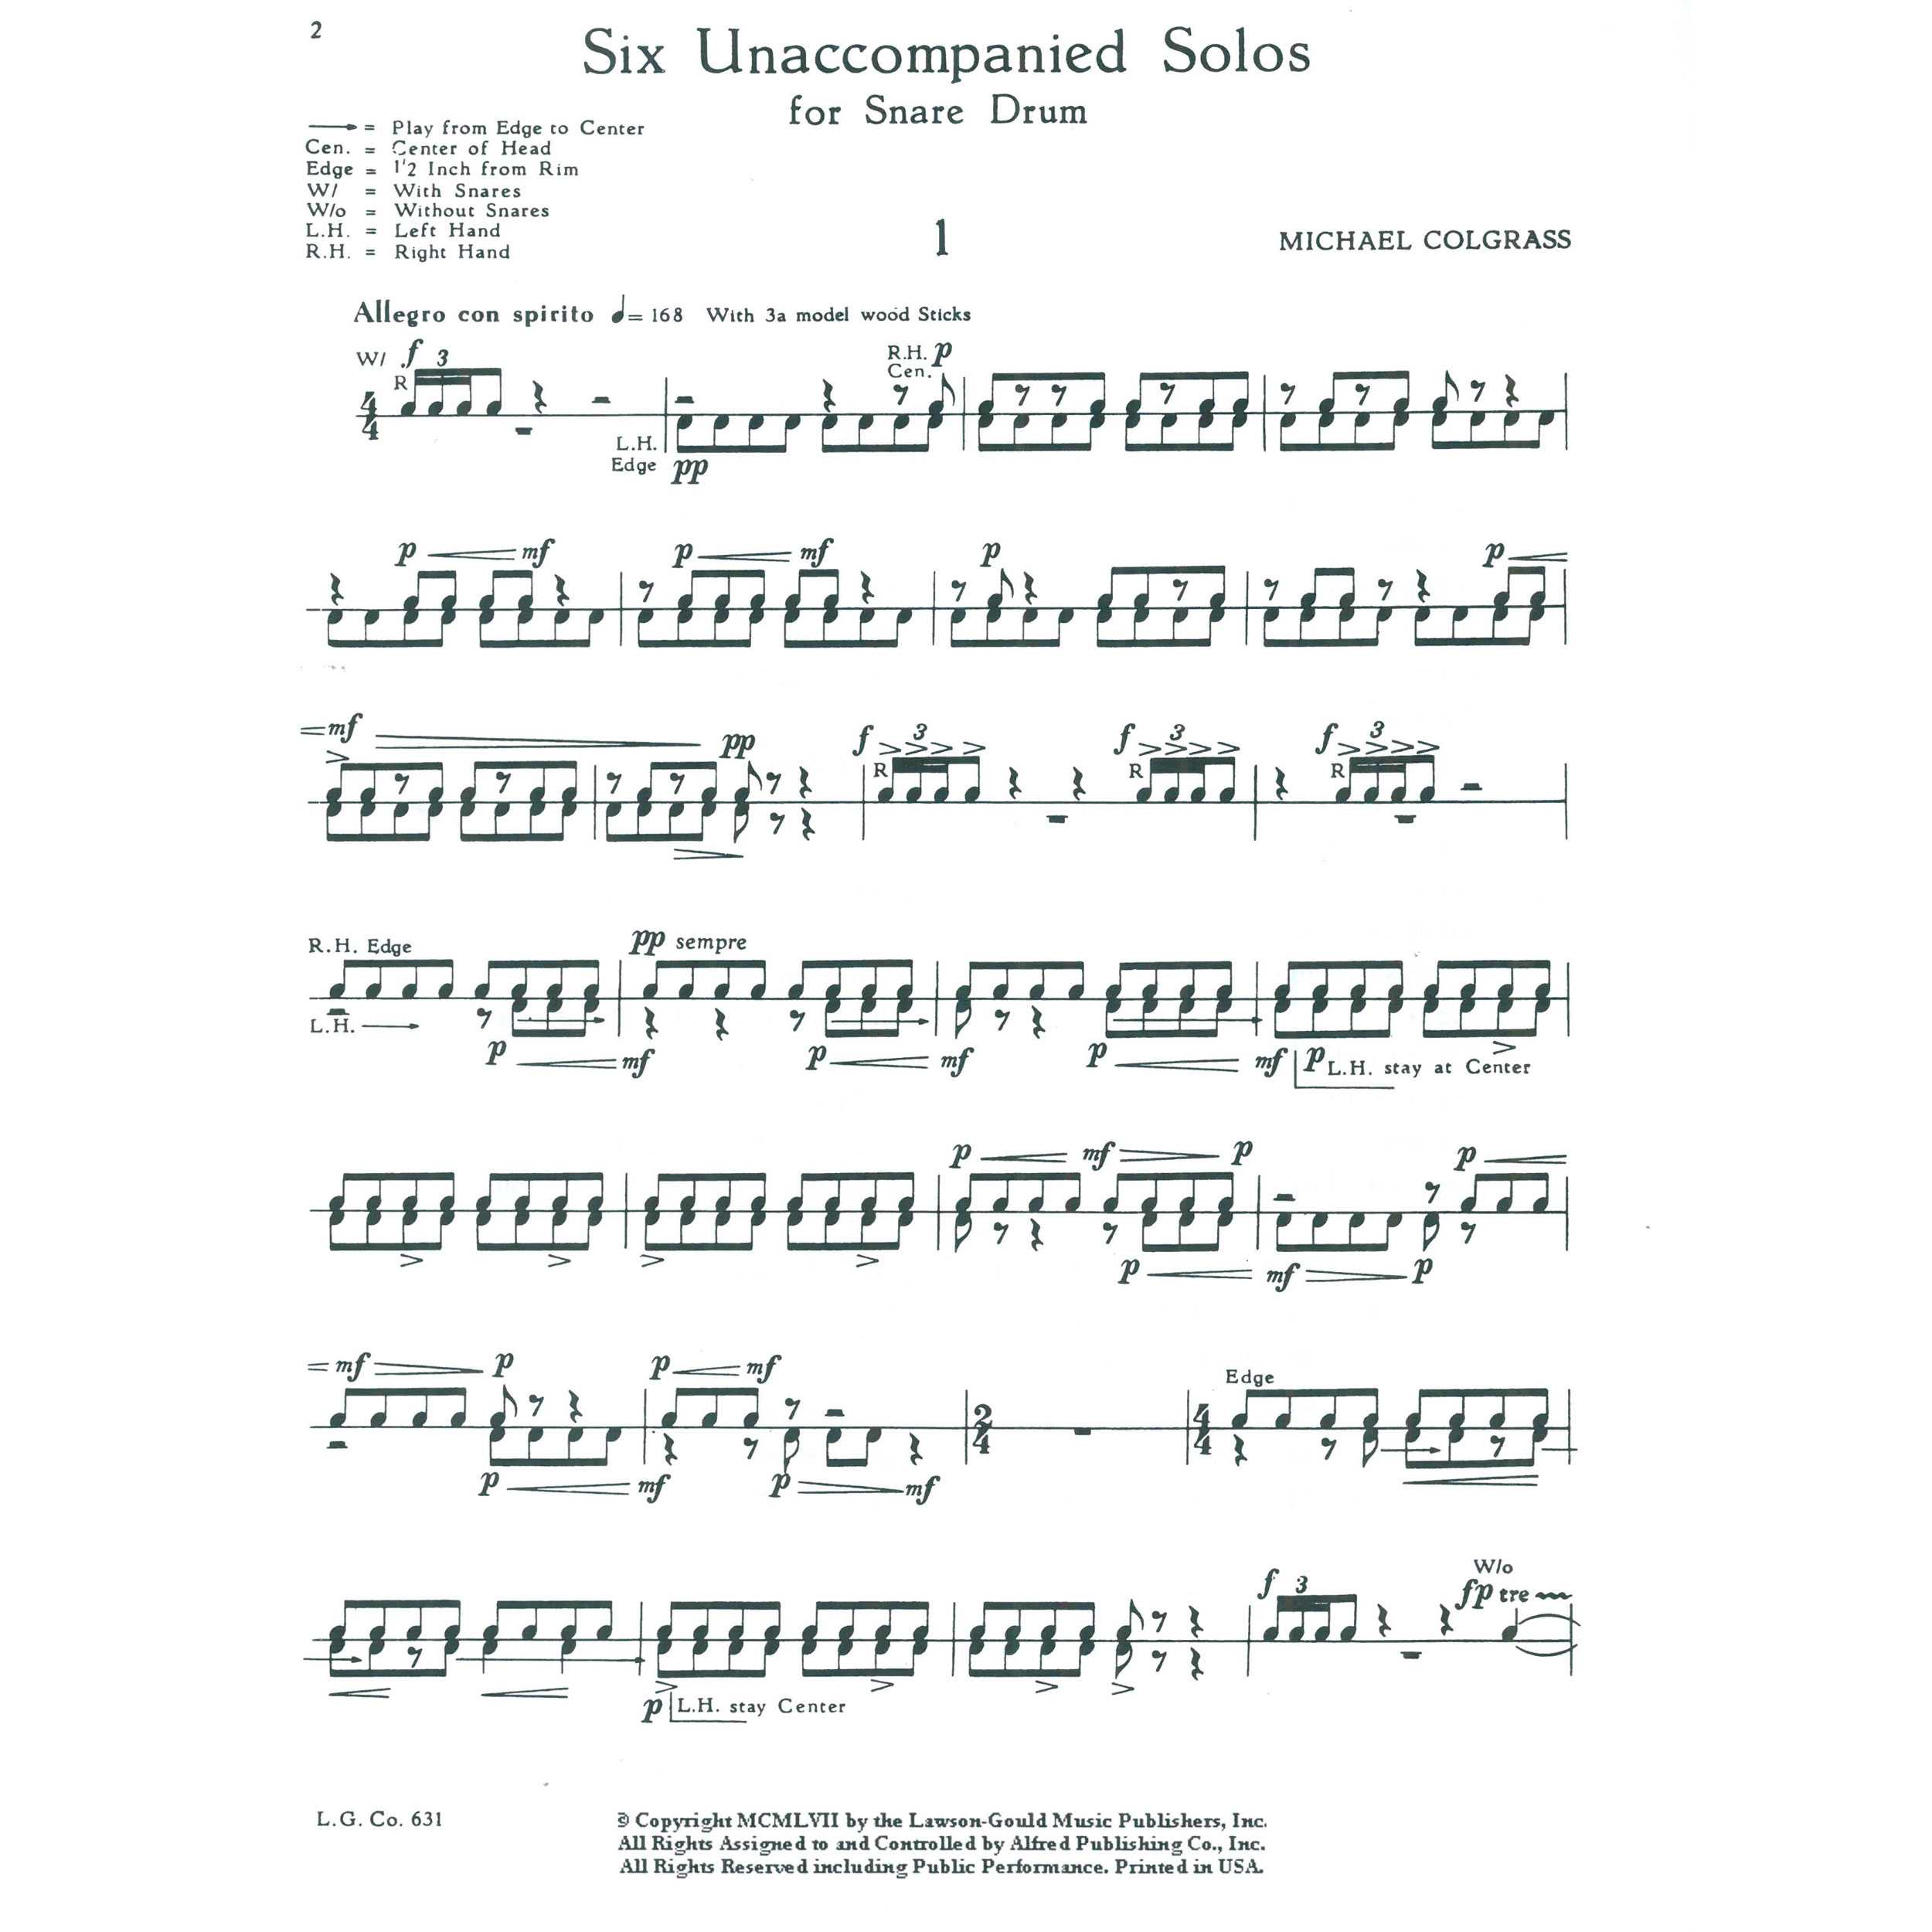 Six Unaccompanied Solos for Snare Drum by Michael Colgrass